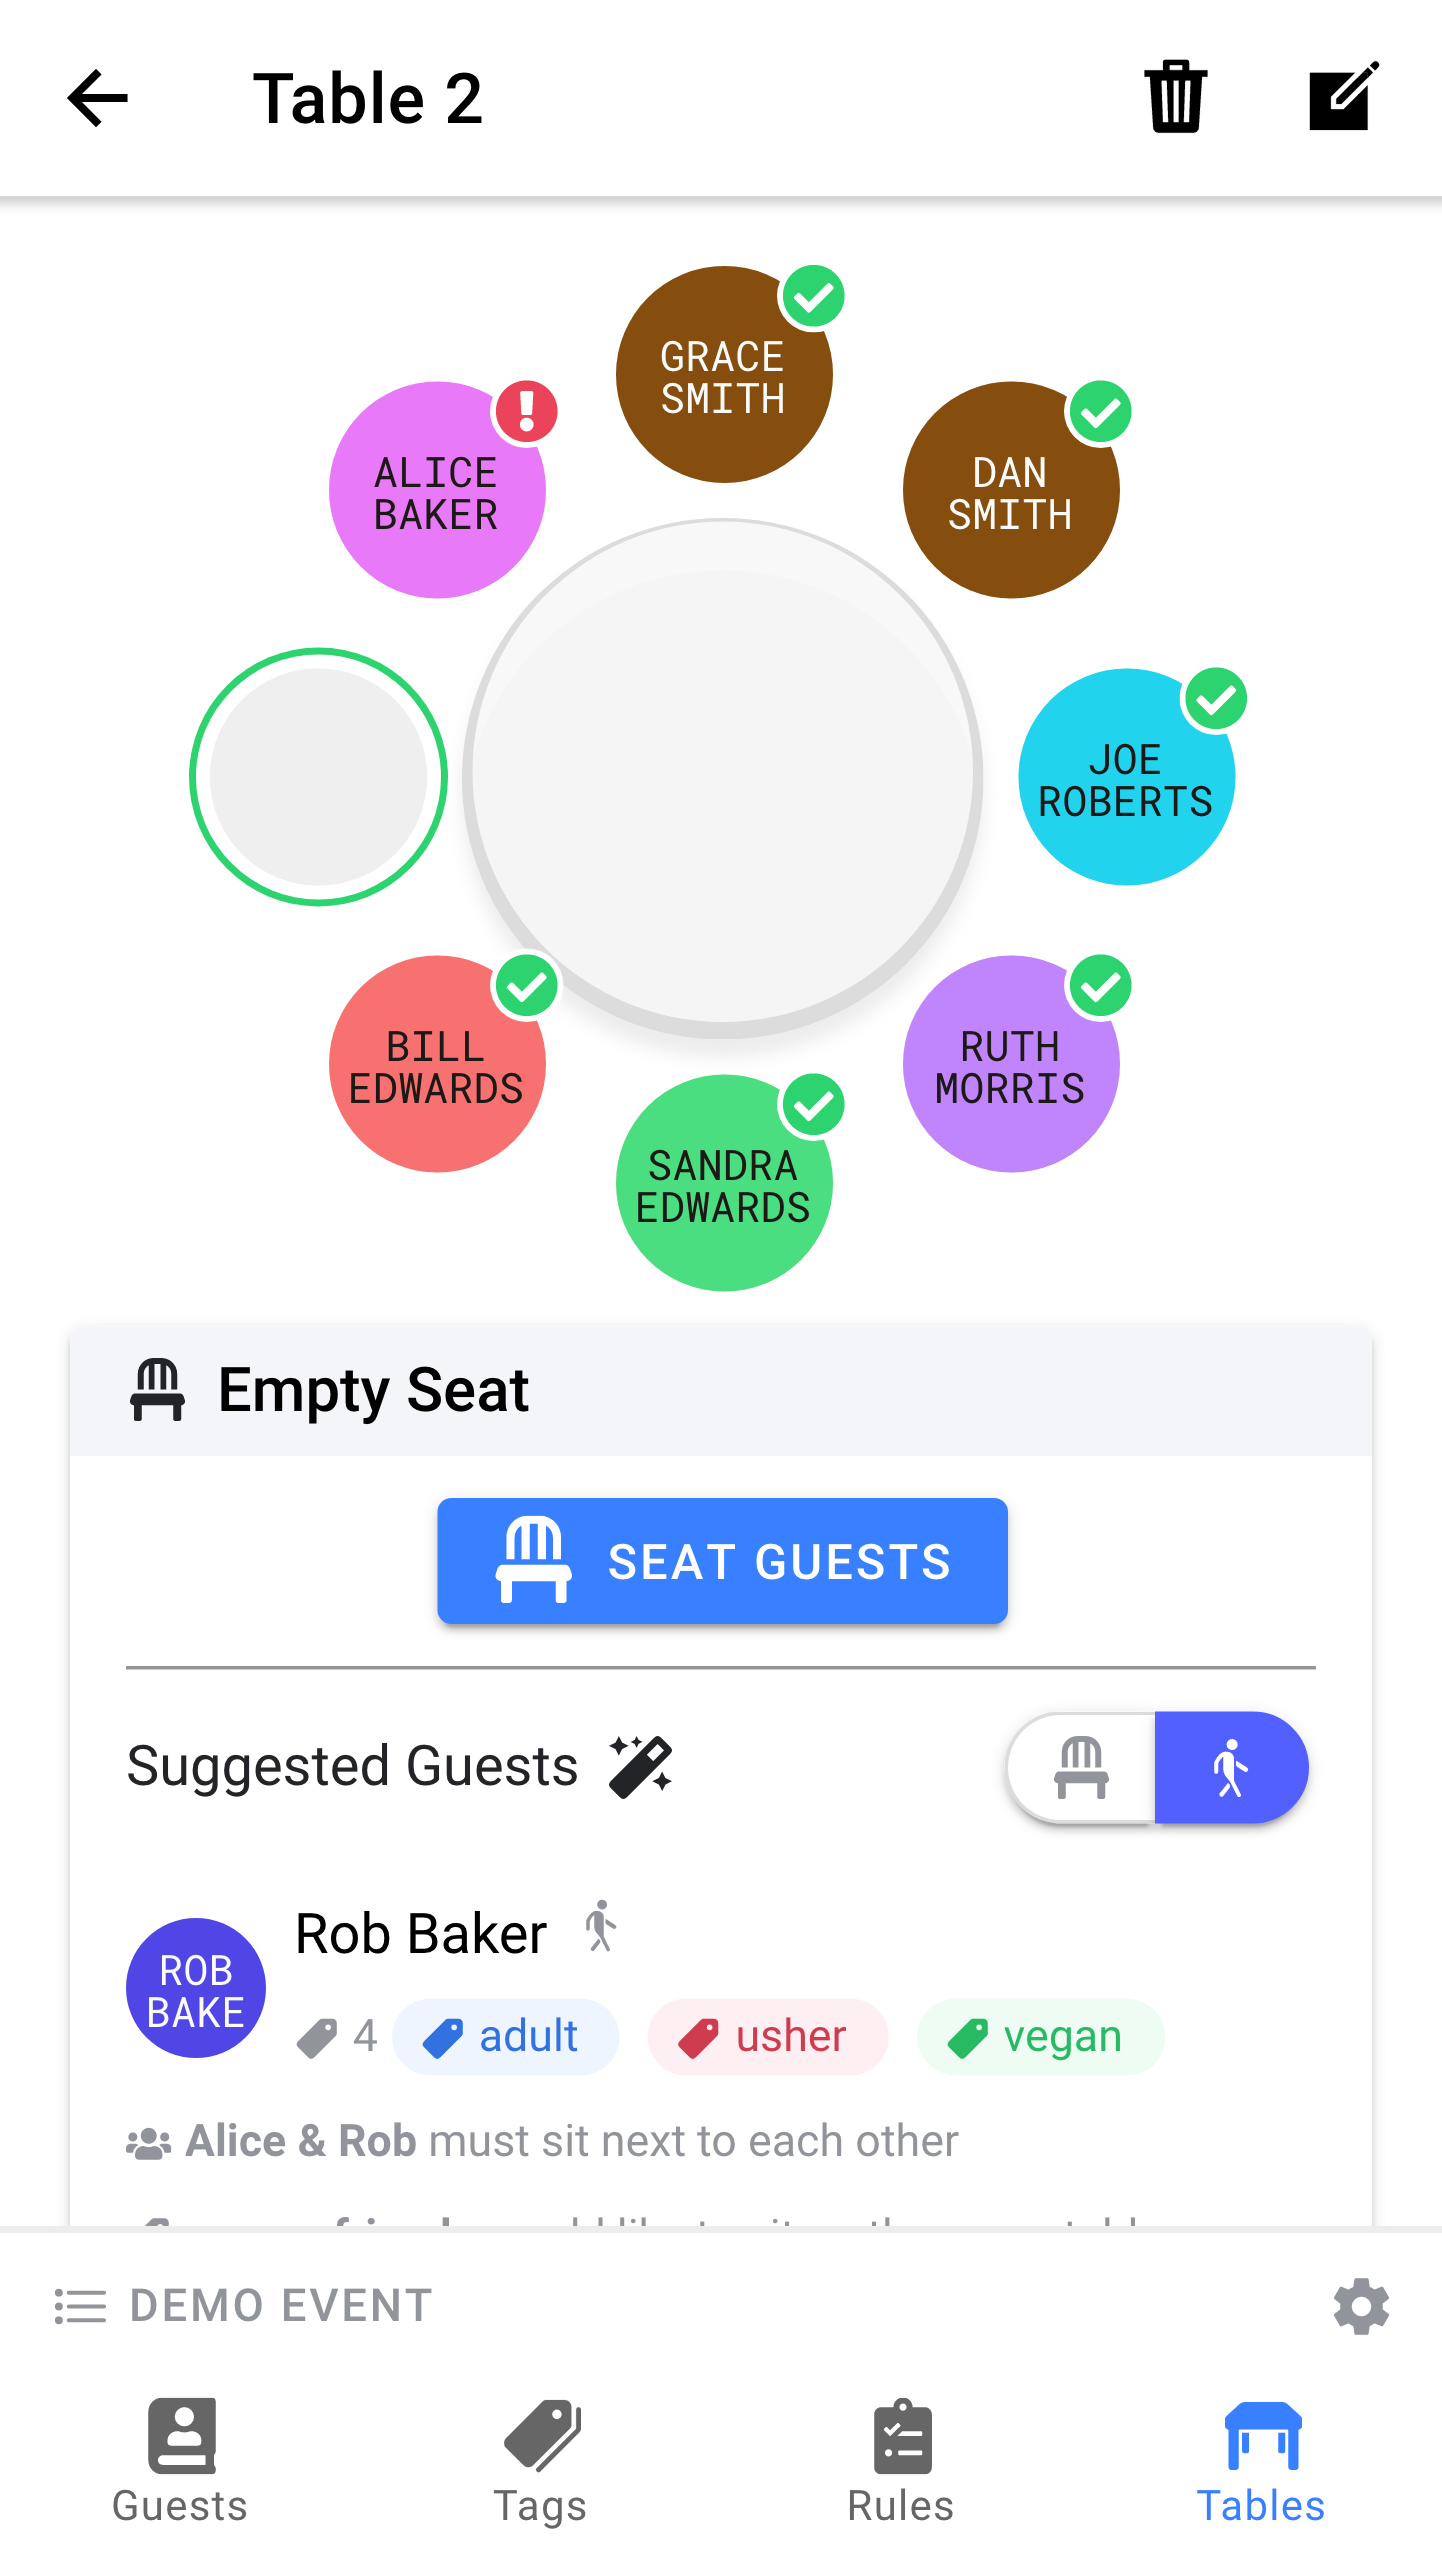 Automatic Seating Suggestions